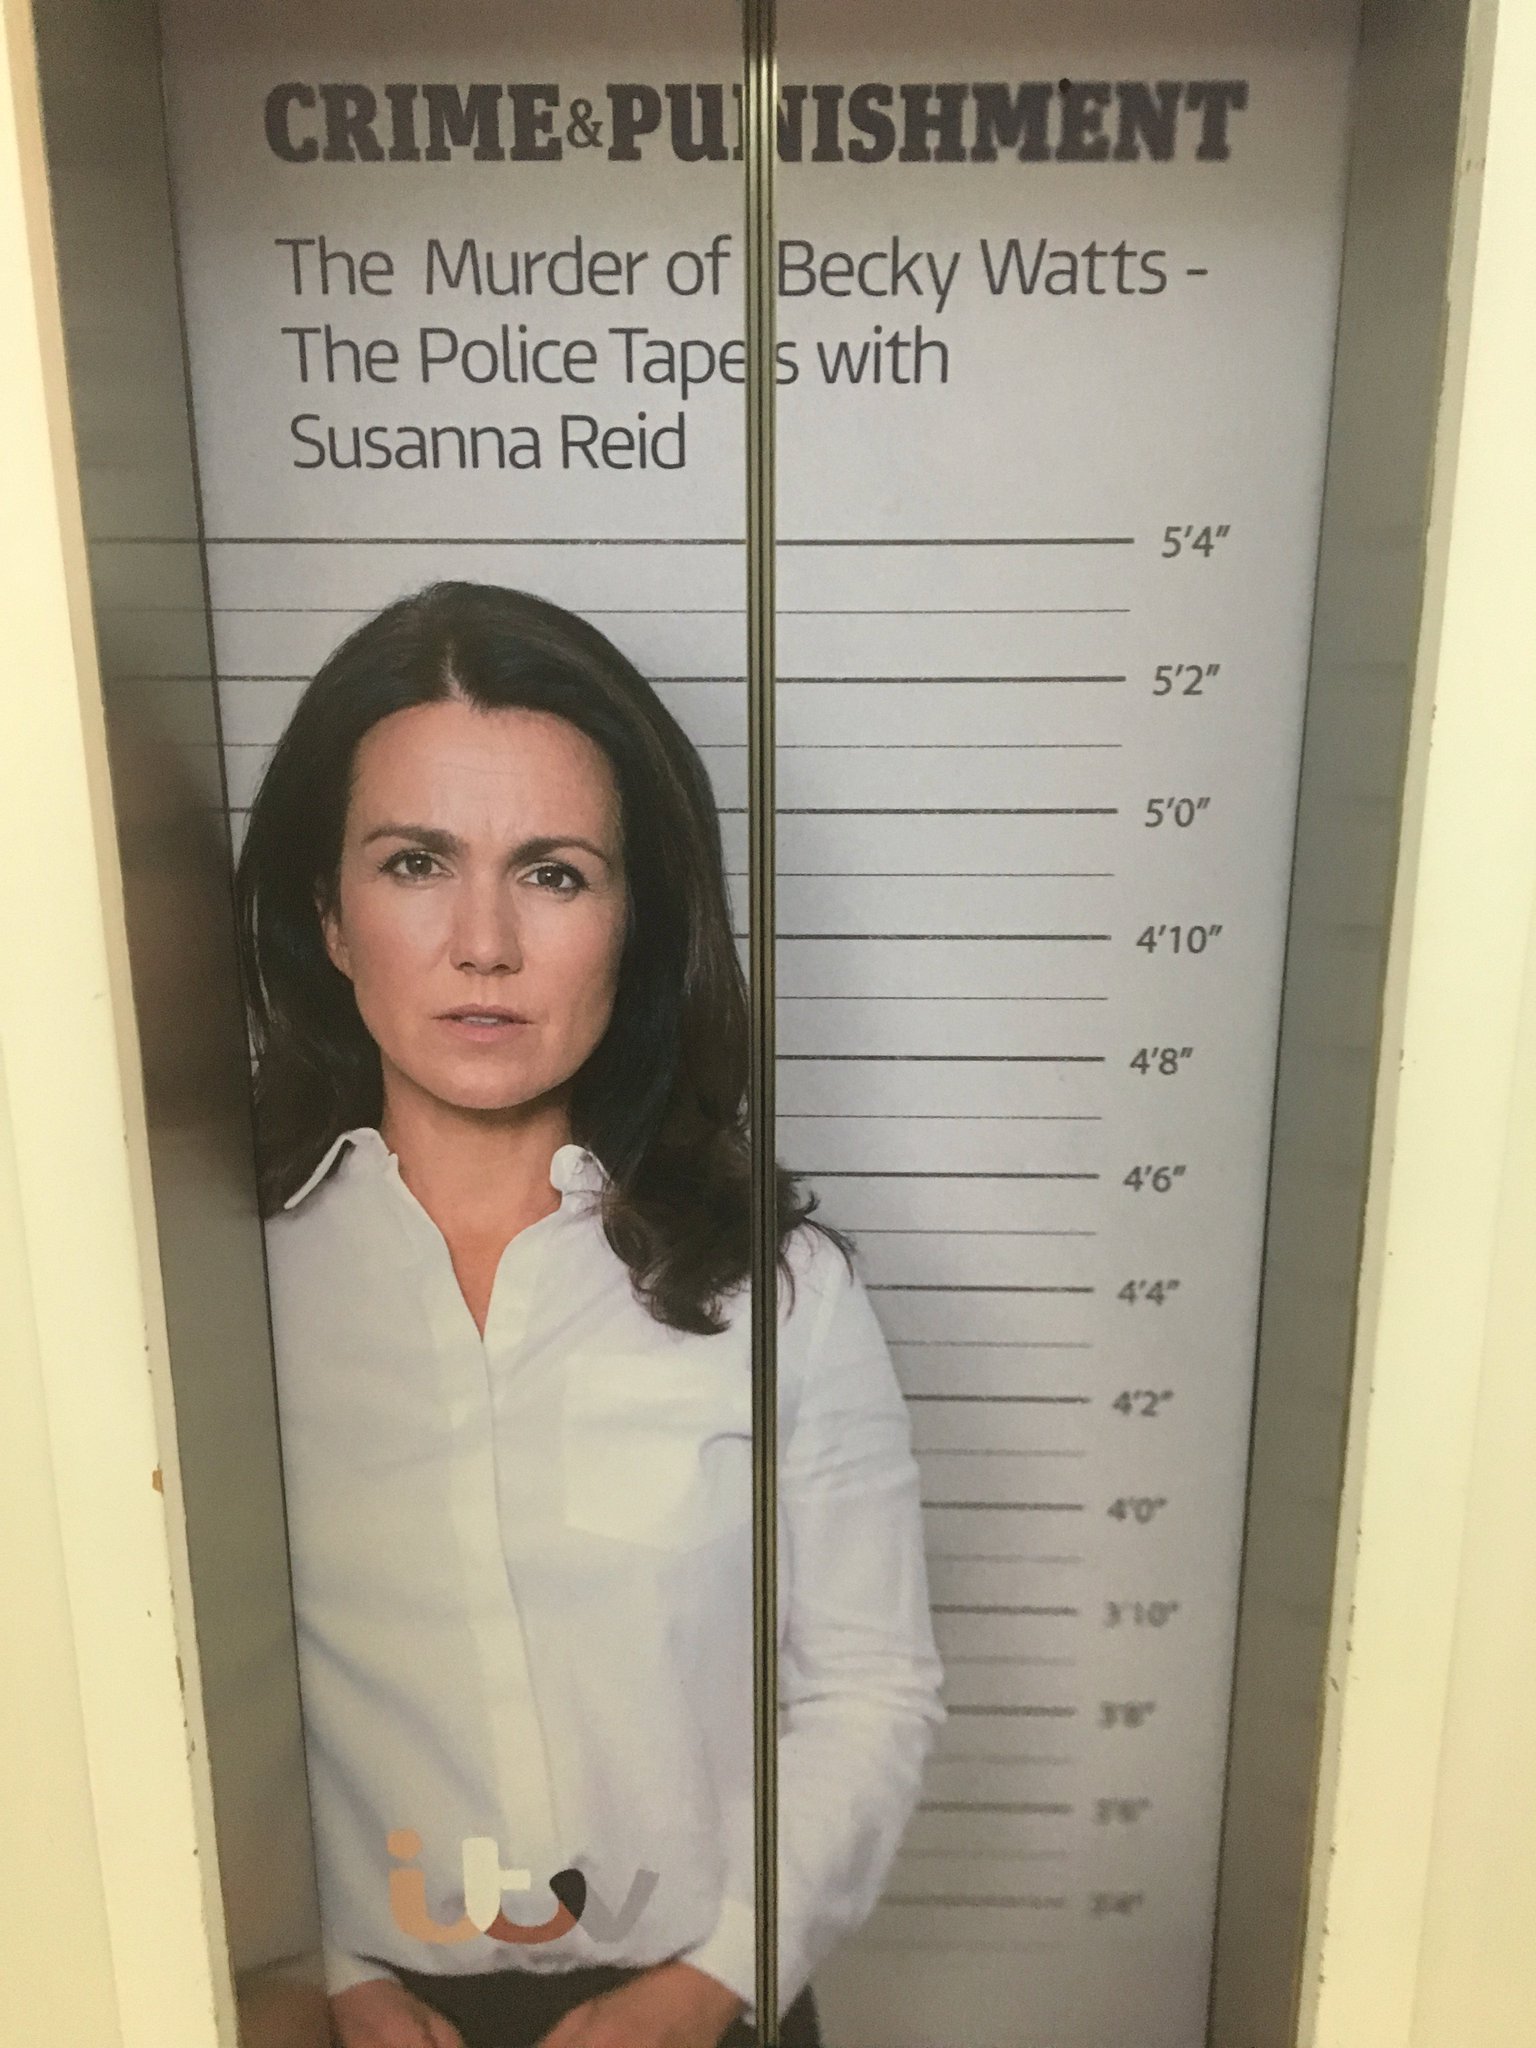 Piers Morgan on Twitter: "A right pair of mugs.. the lifts ...